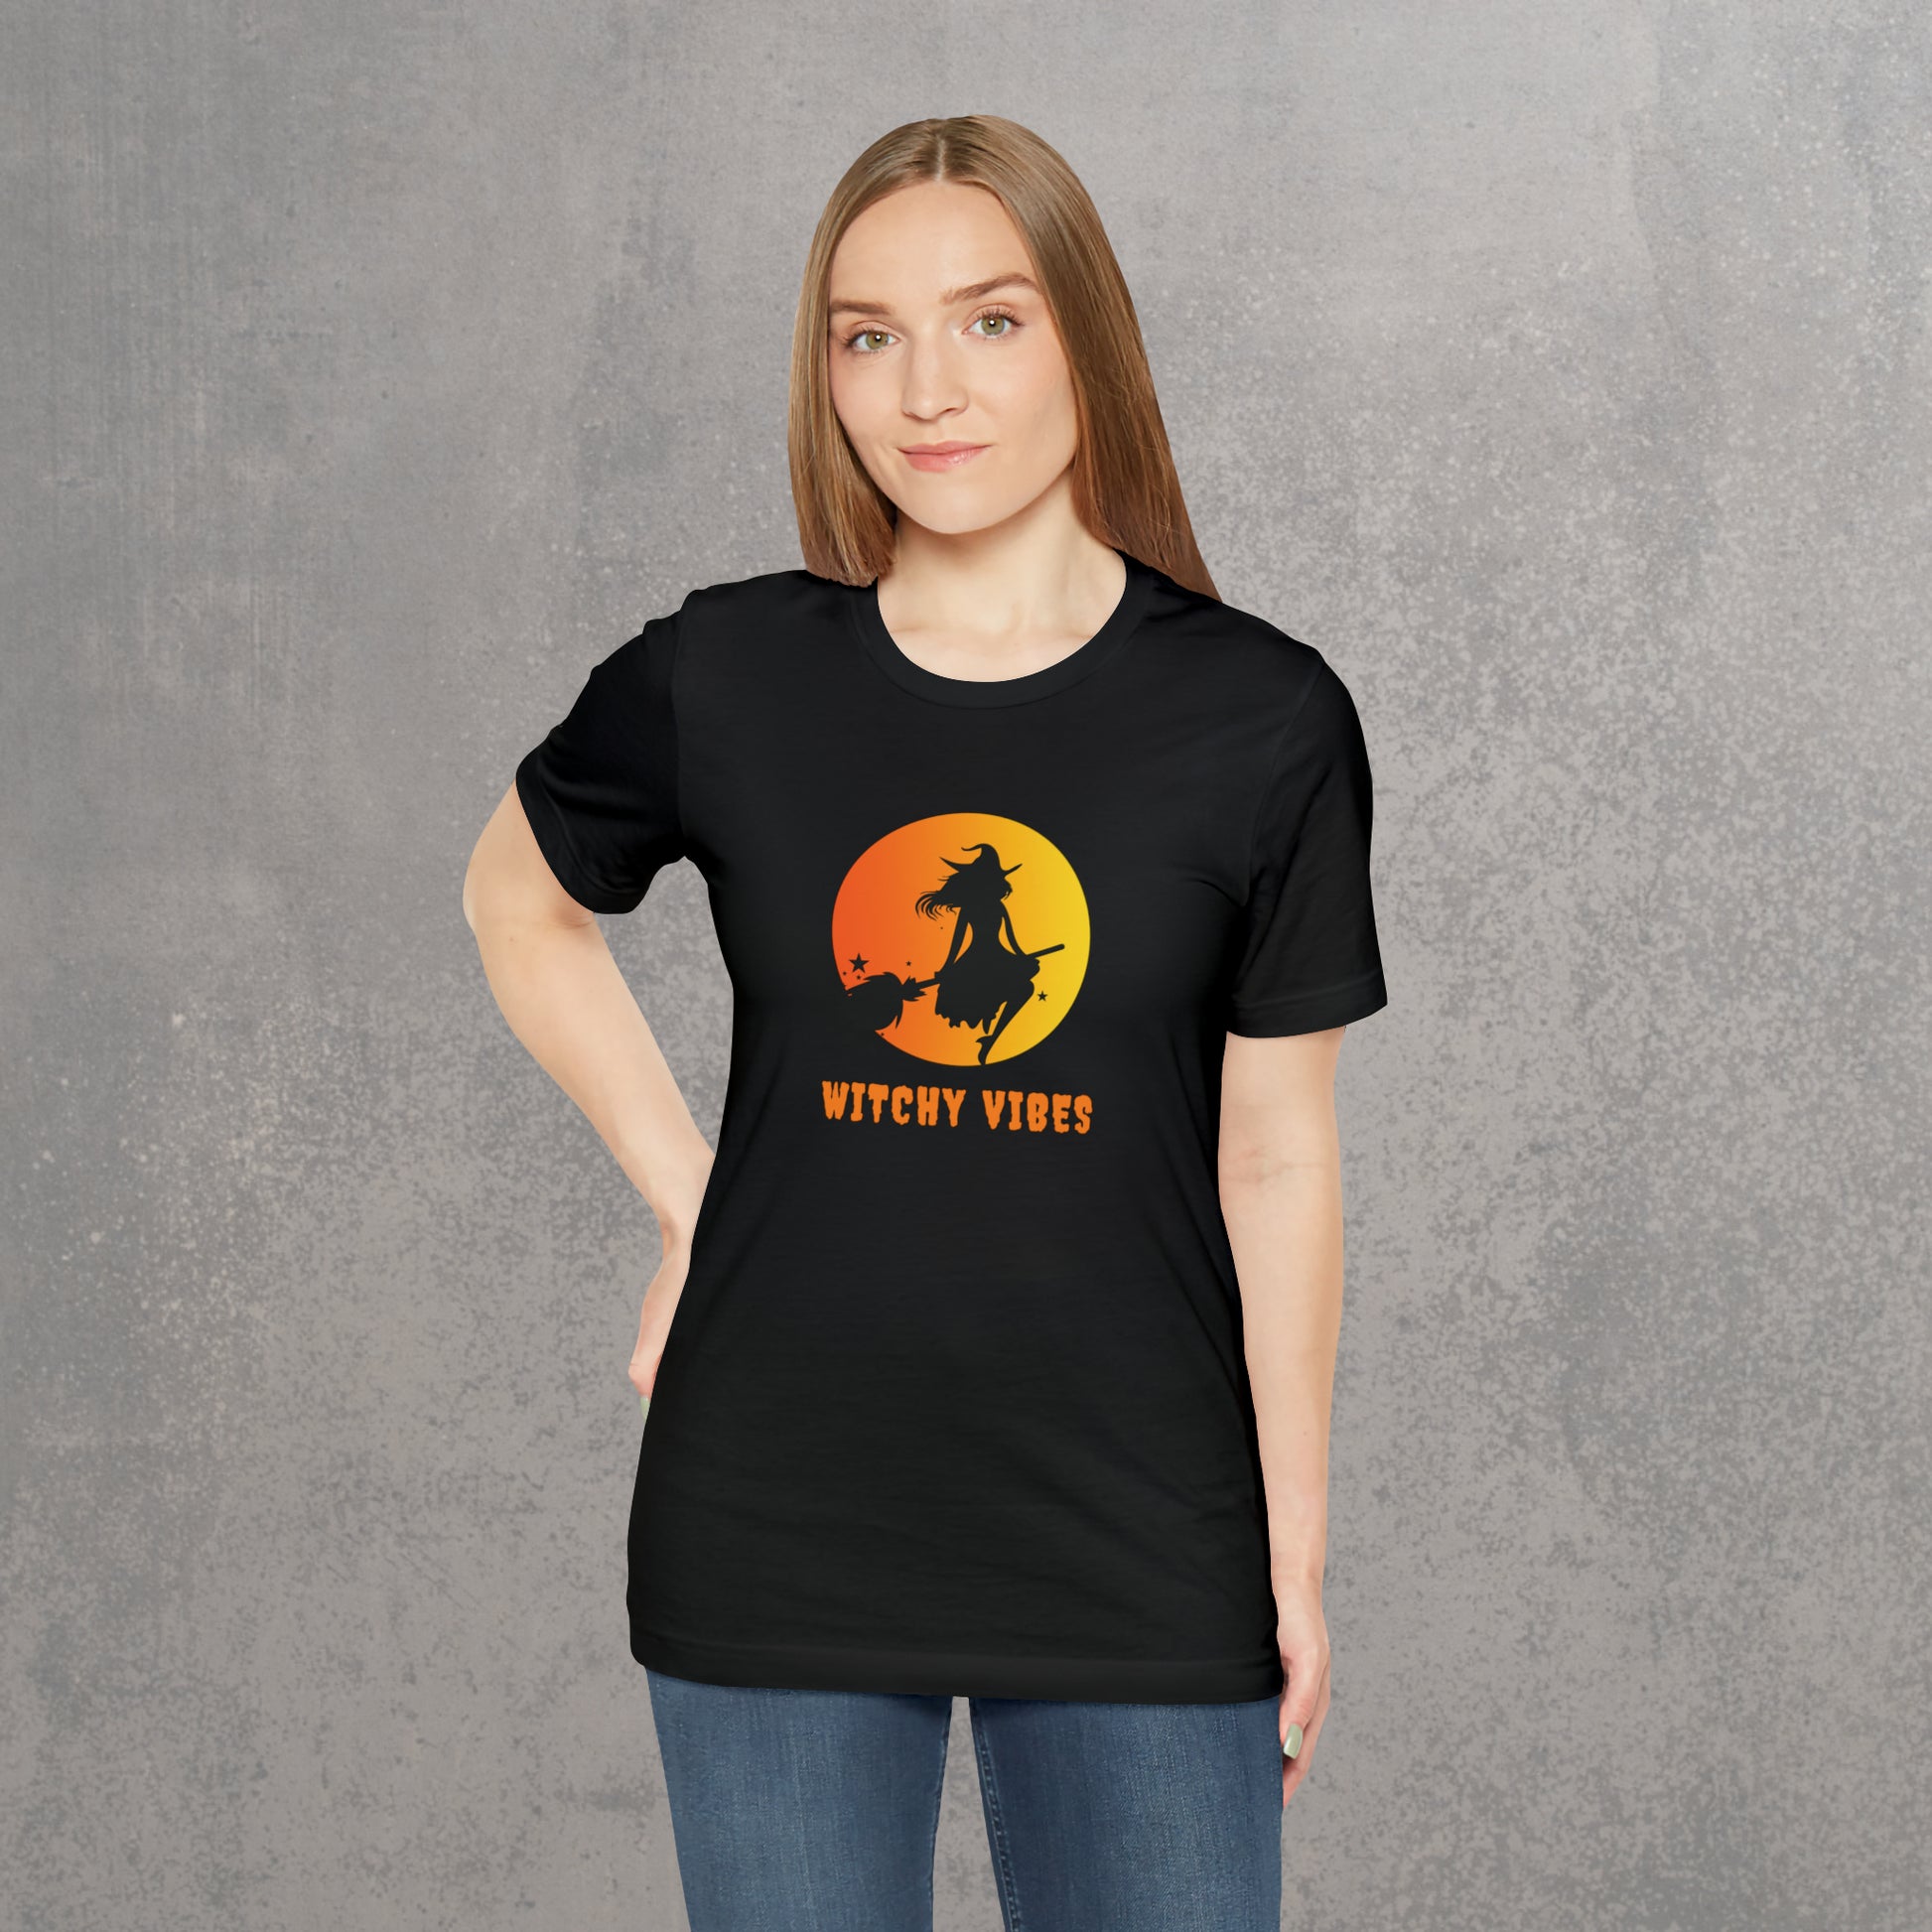 RECONZY Black 'Witchy Vibes' Pop-Punk Halloween T-Shirt - Model View.